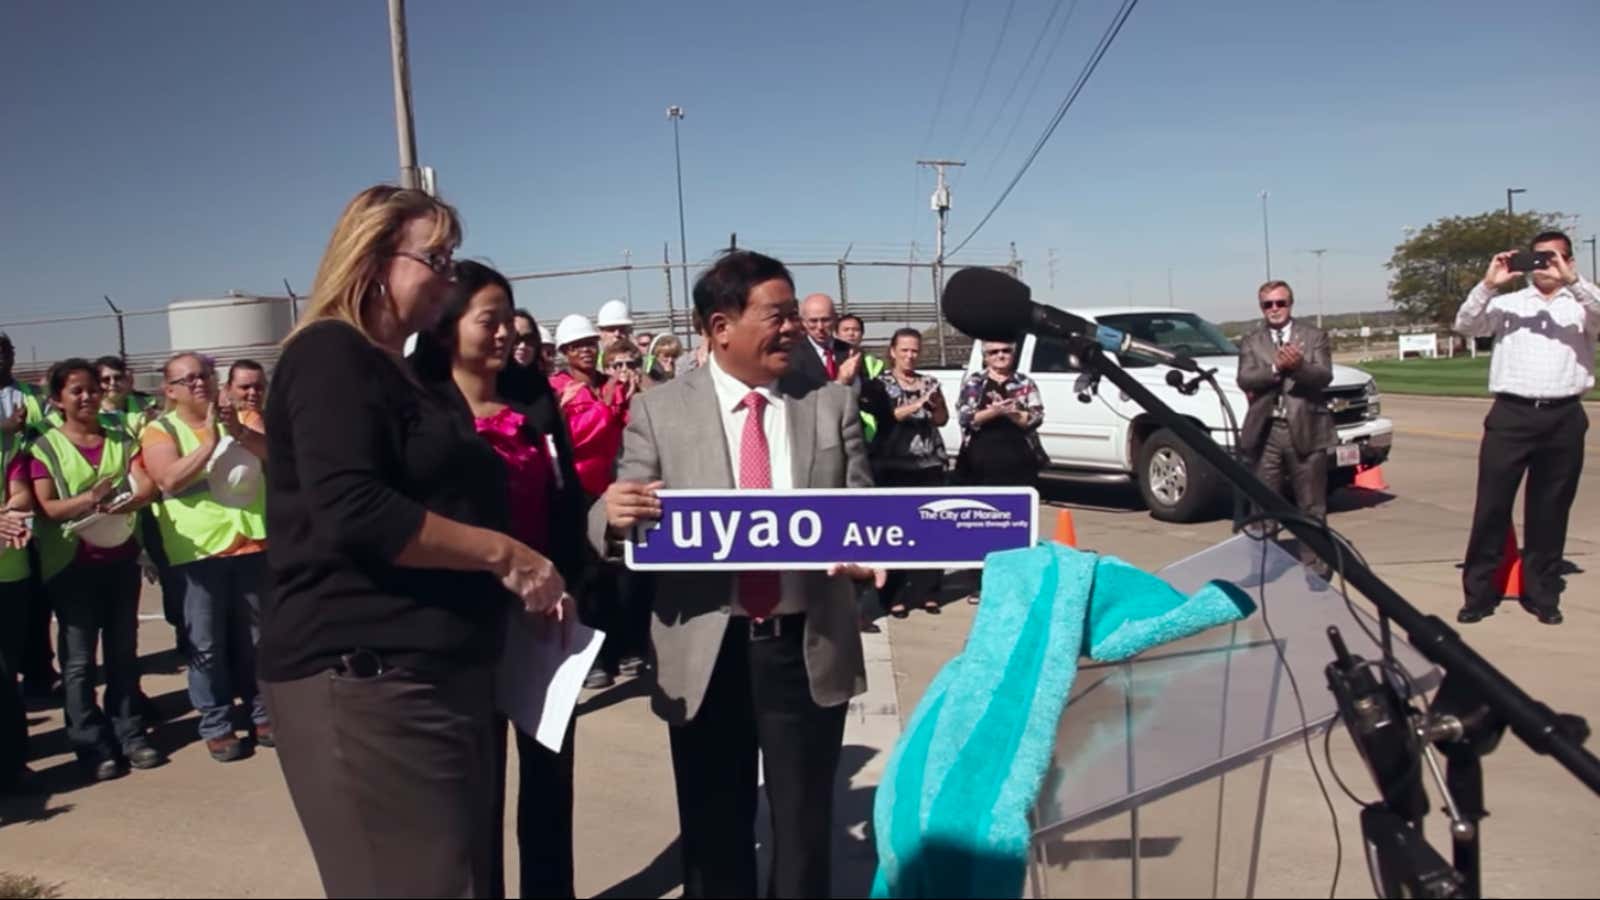 Cao Dewang, founder of Fuyao, accepts an Ohio street sign named after the company.